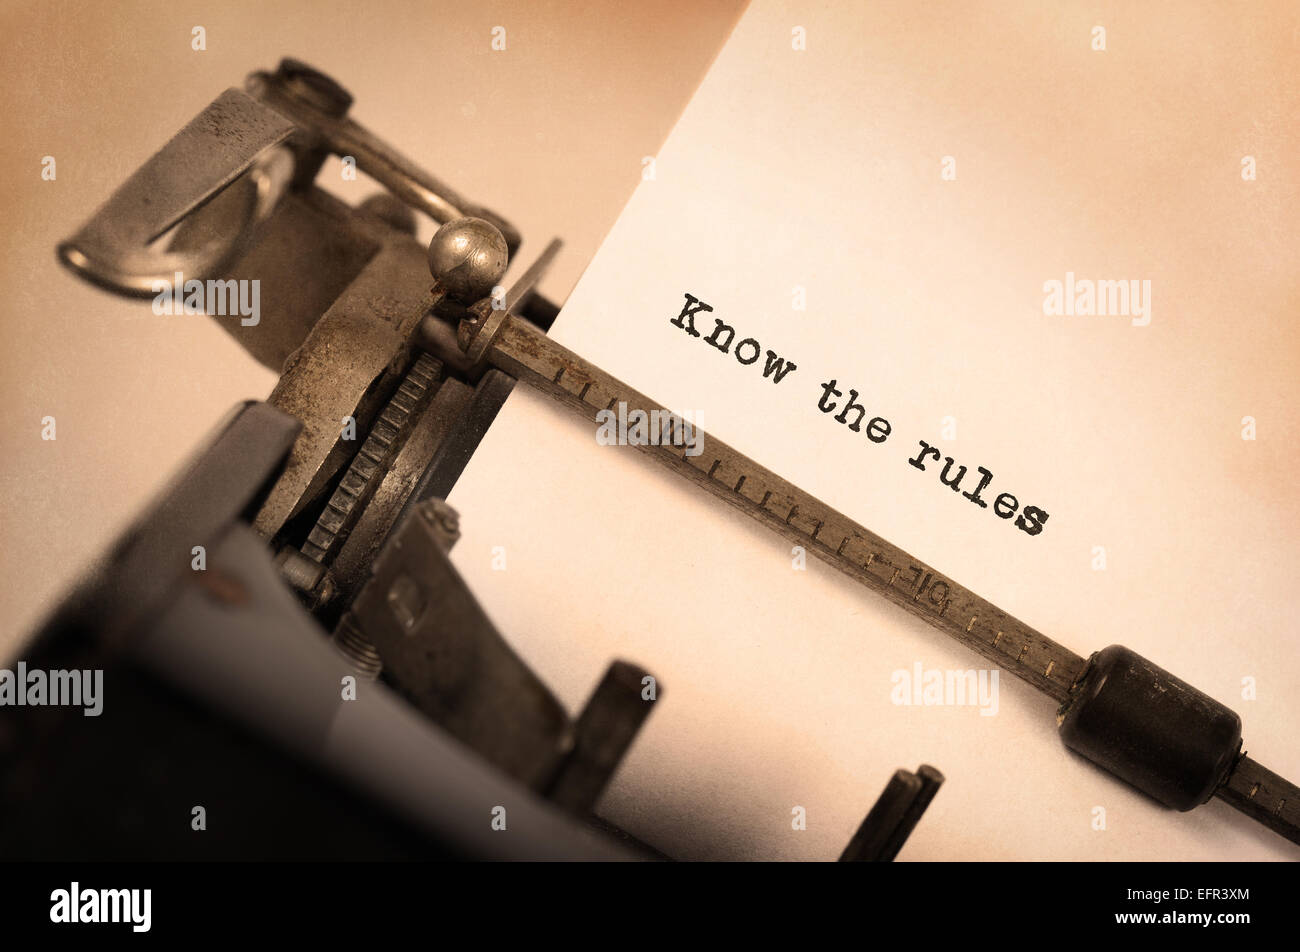 Vintage inscription made by old typewriter, Know the rules Stock Photo